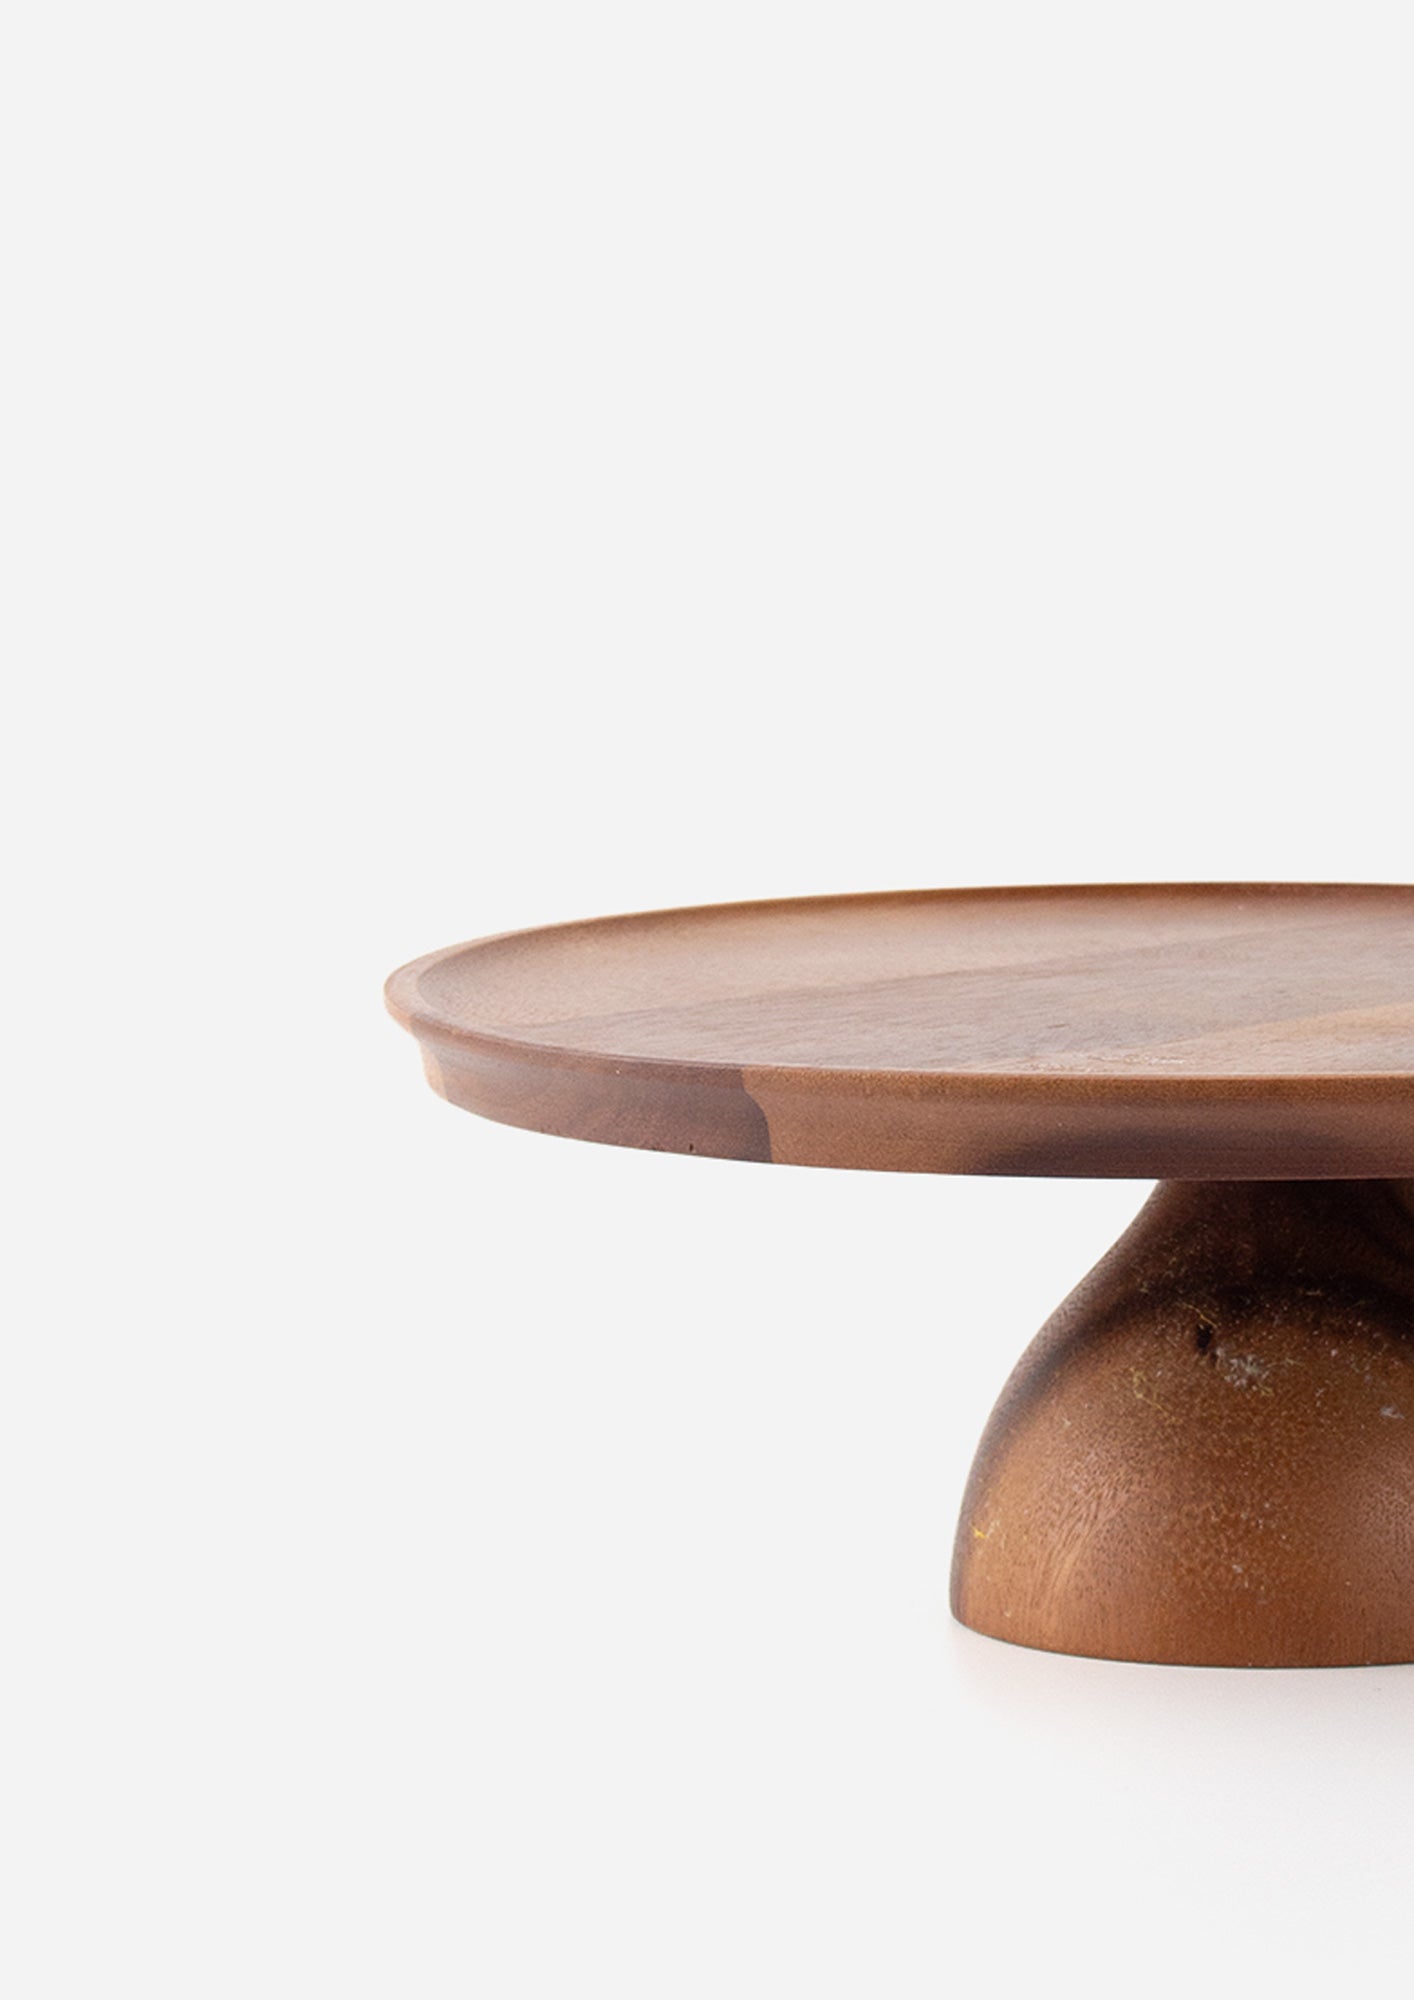 Acacia Footed Cake Stand